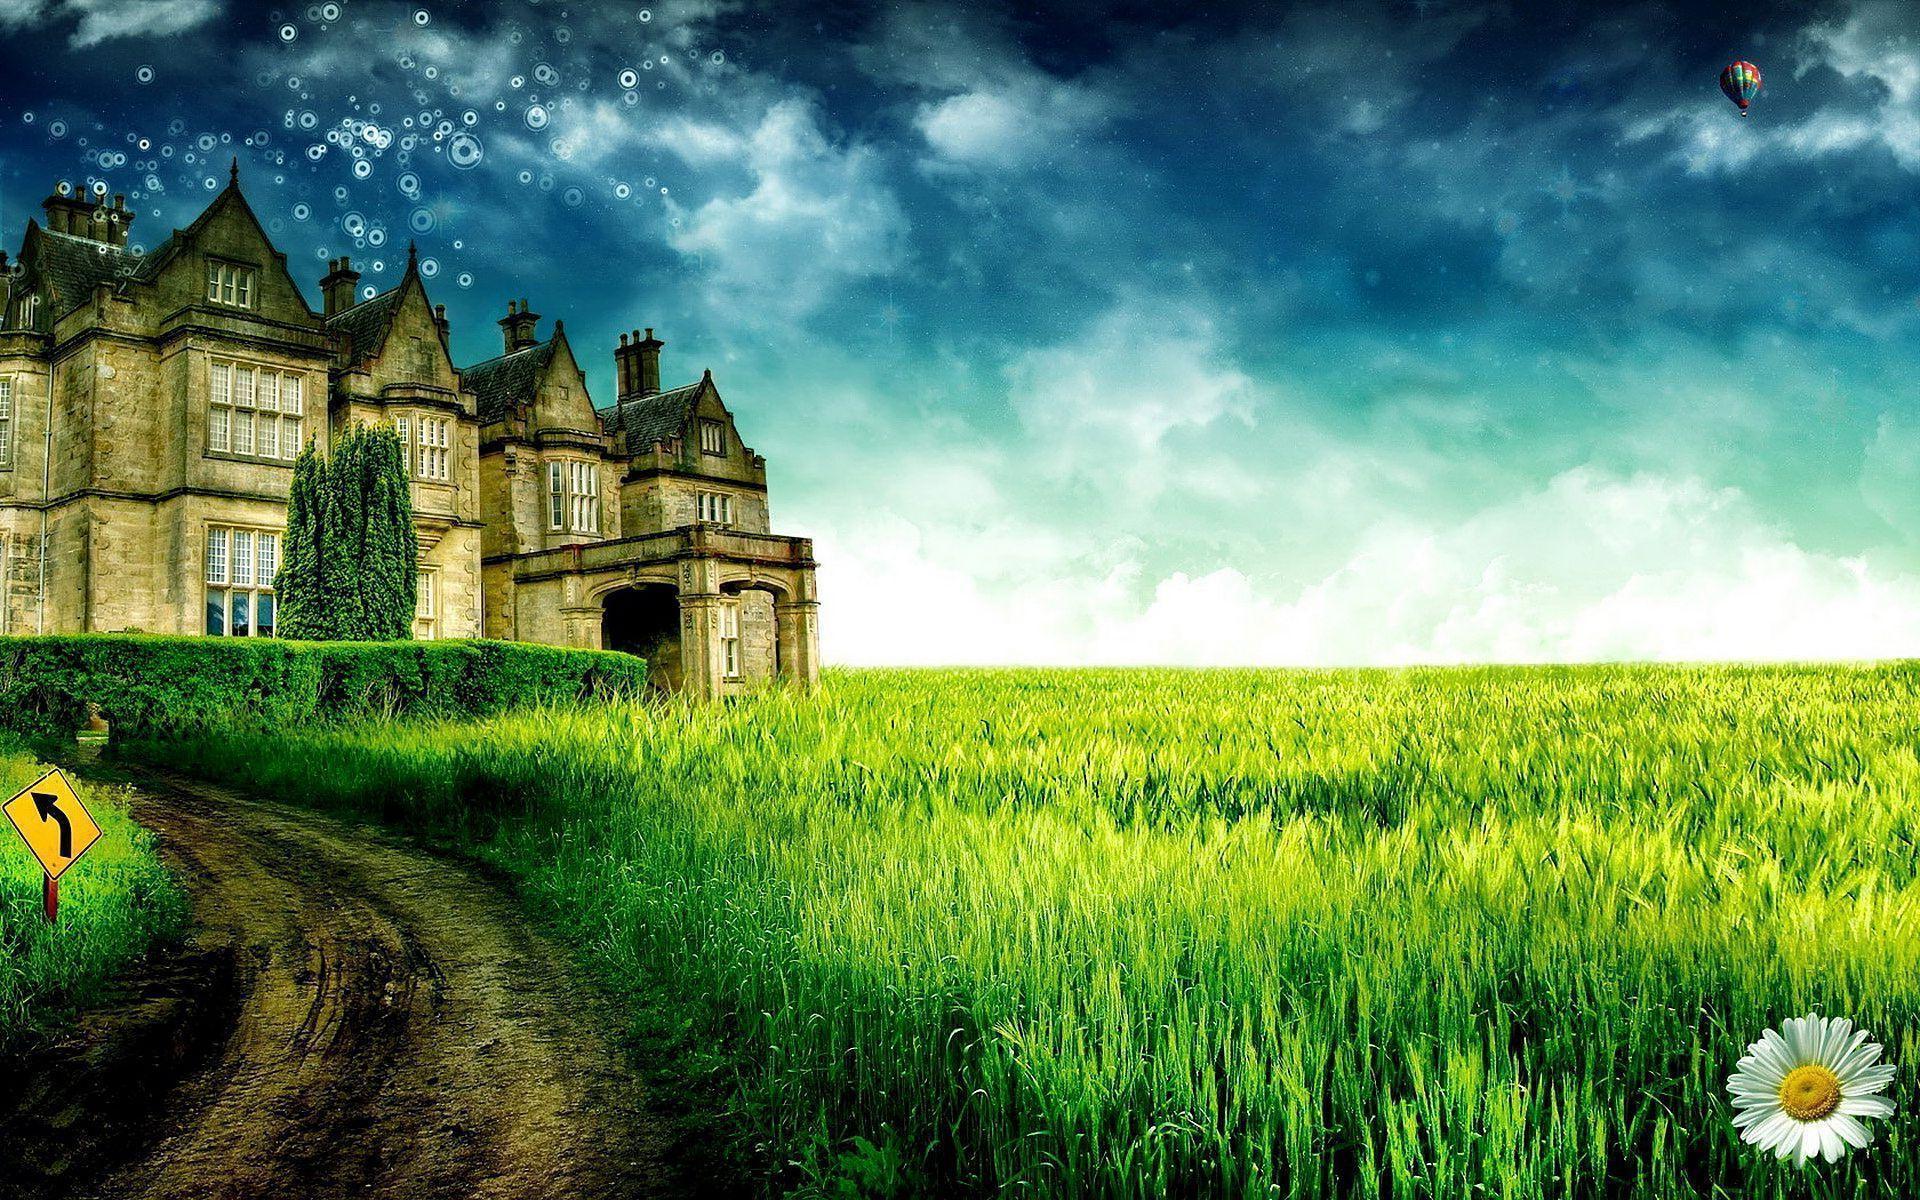 The Dreamy Castle Wallpaper and